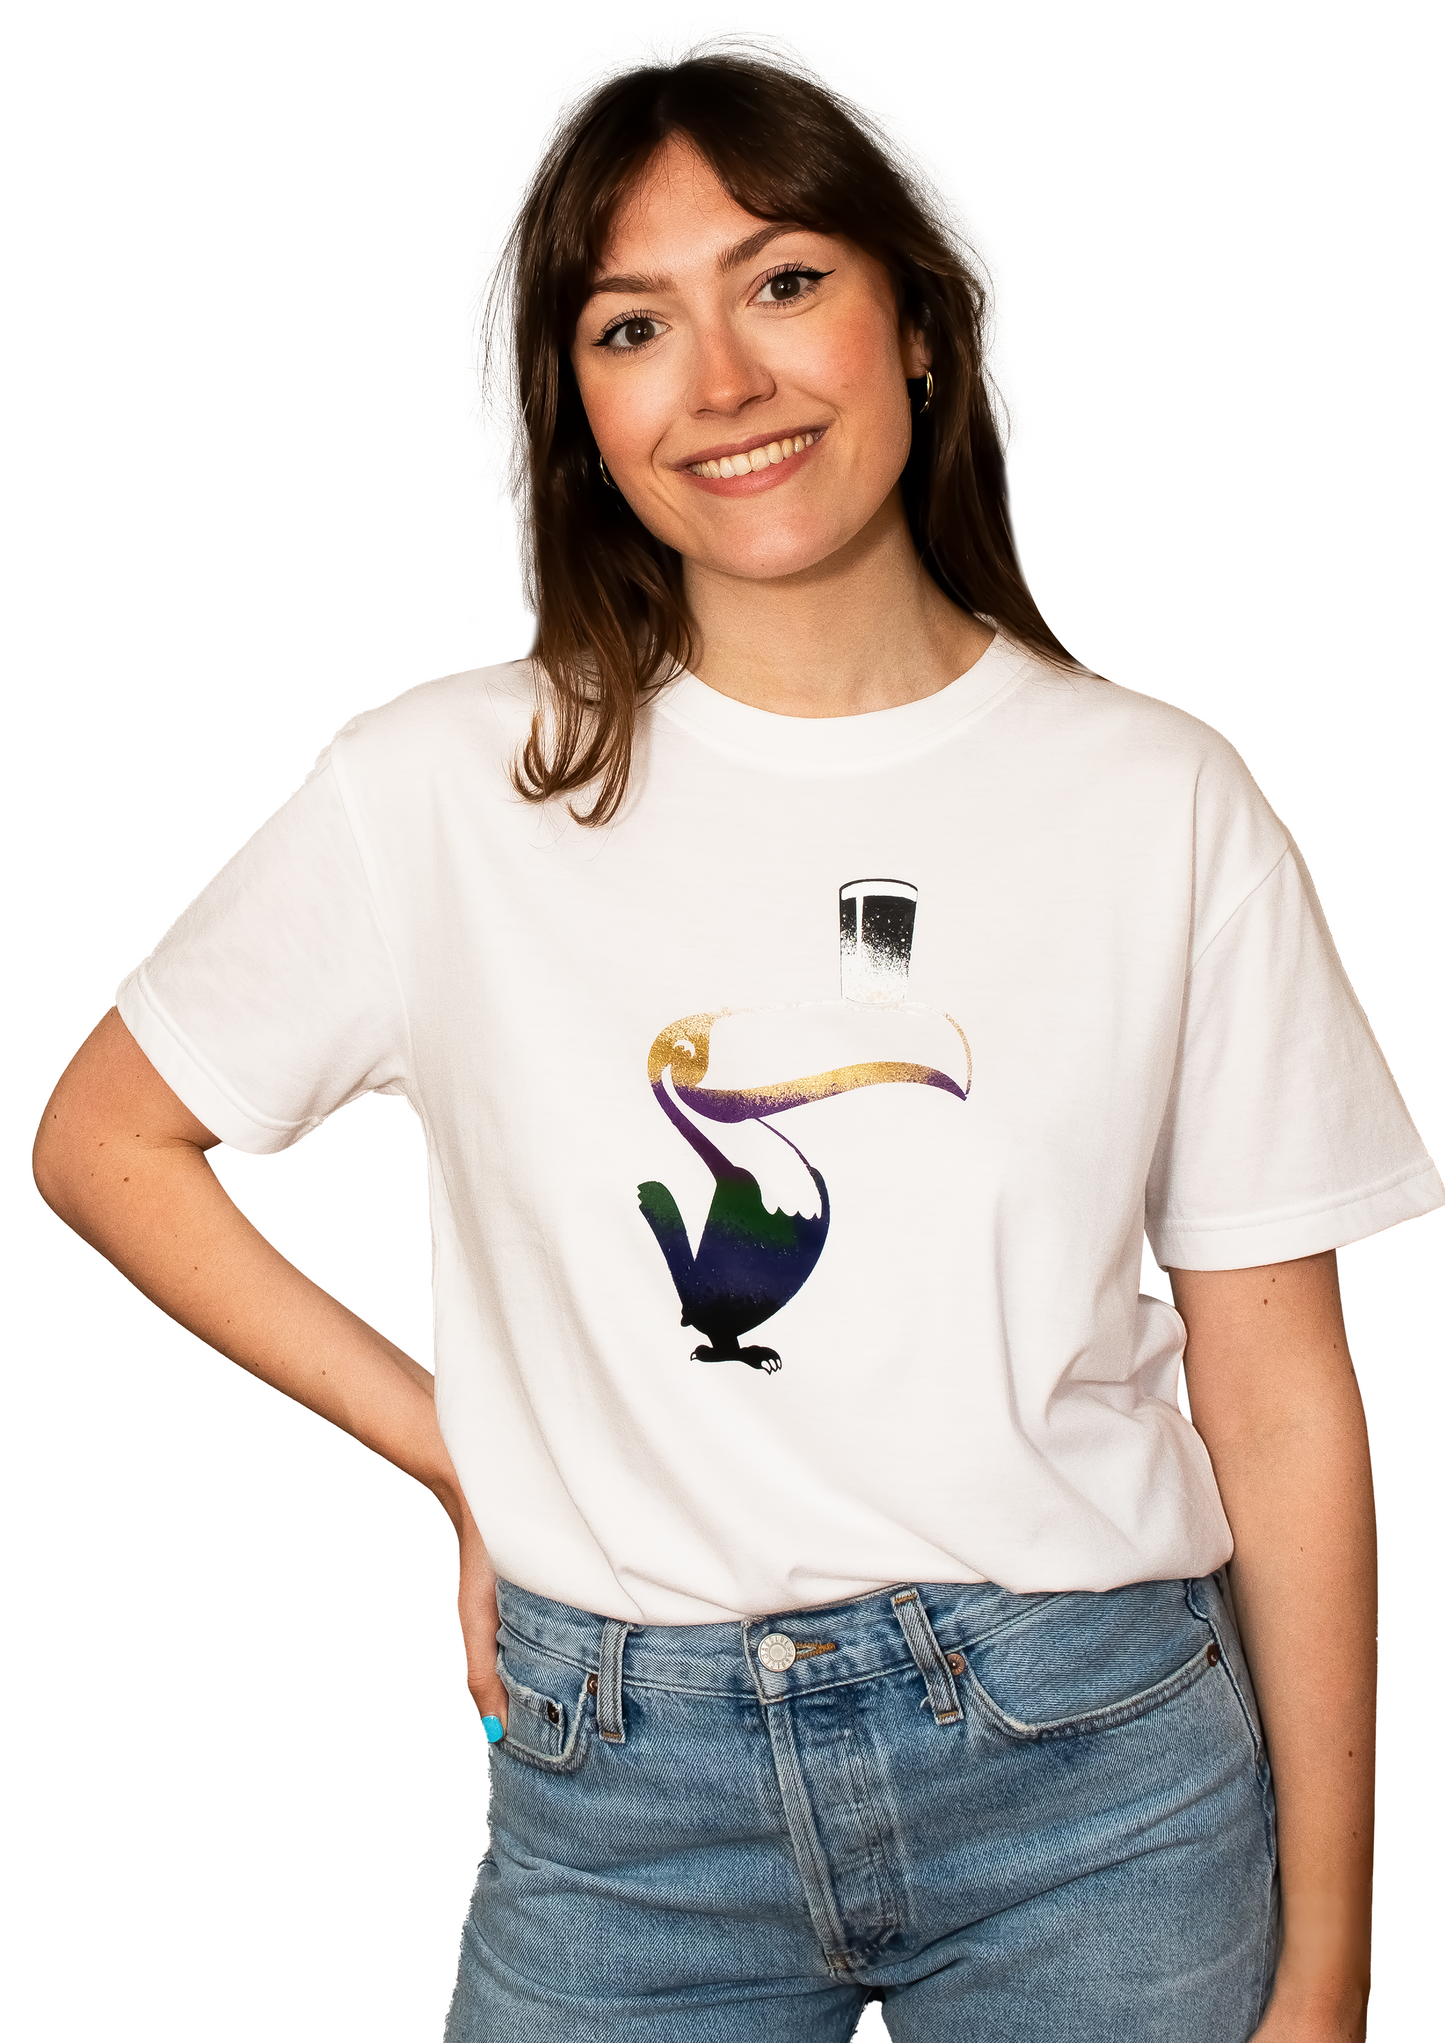 A woman wearing a Guinness Liquid Toucan T-Shirt - White, made of BCI cotton.